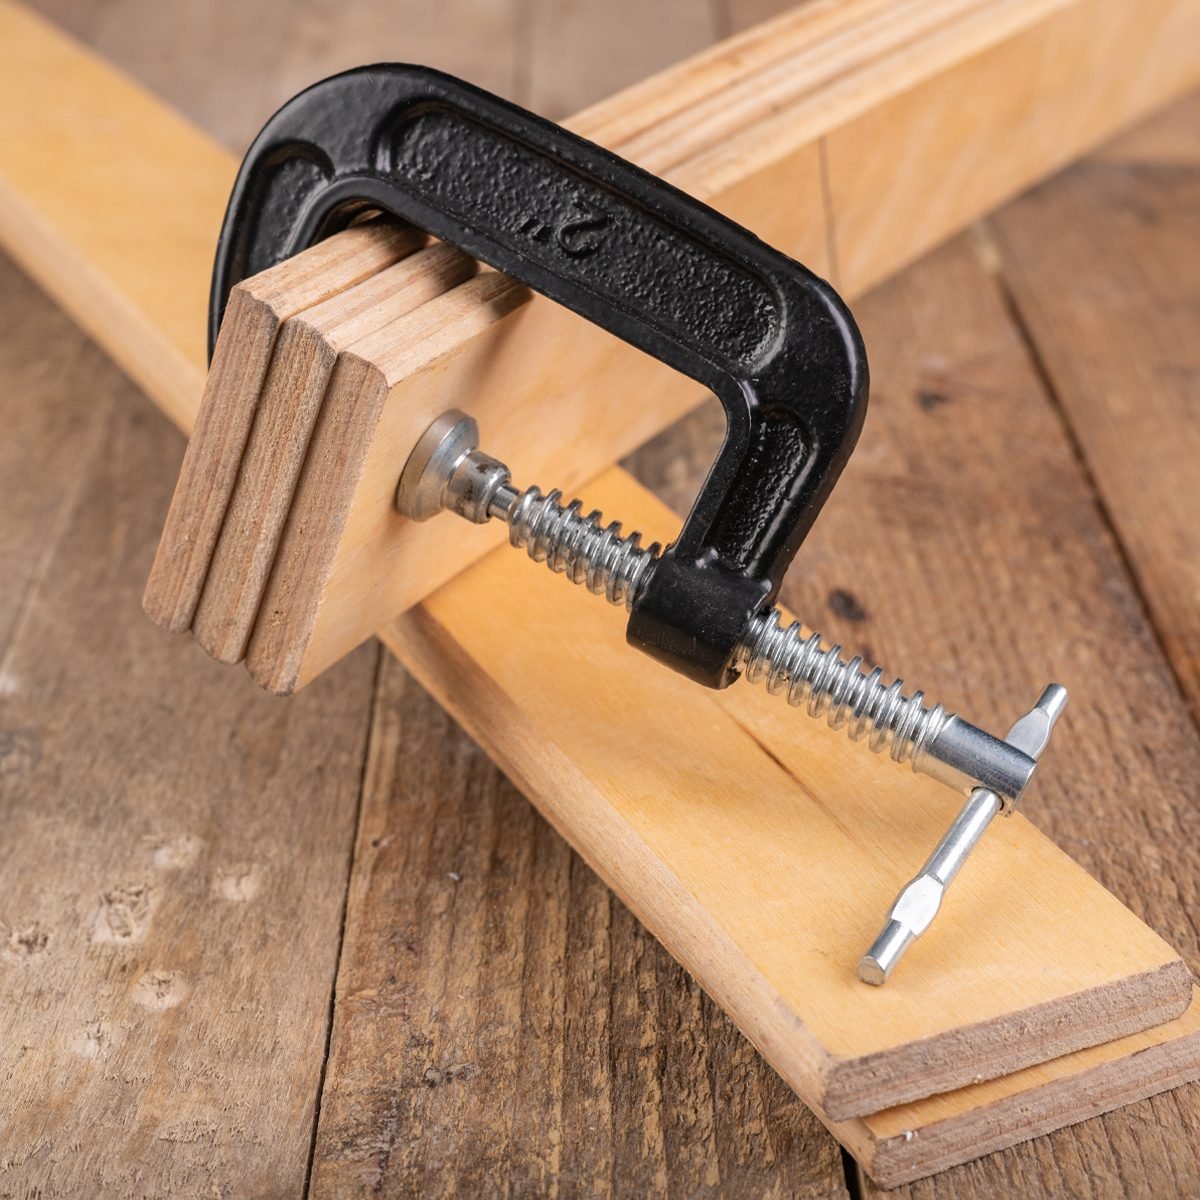 https://www.familyhandyman.com/wp-content/uploads/2022/11/GettyImages-Carpentry-clamp-used-for-gluing-wood-1251594347-by-Piotr-Wytrazek.jpg?fit=700%2C1024